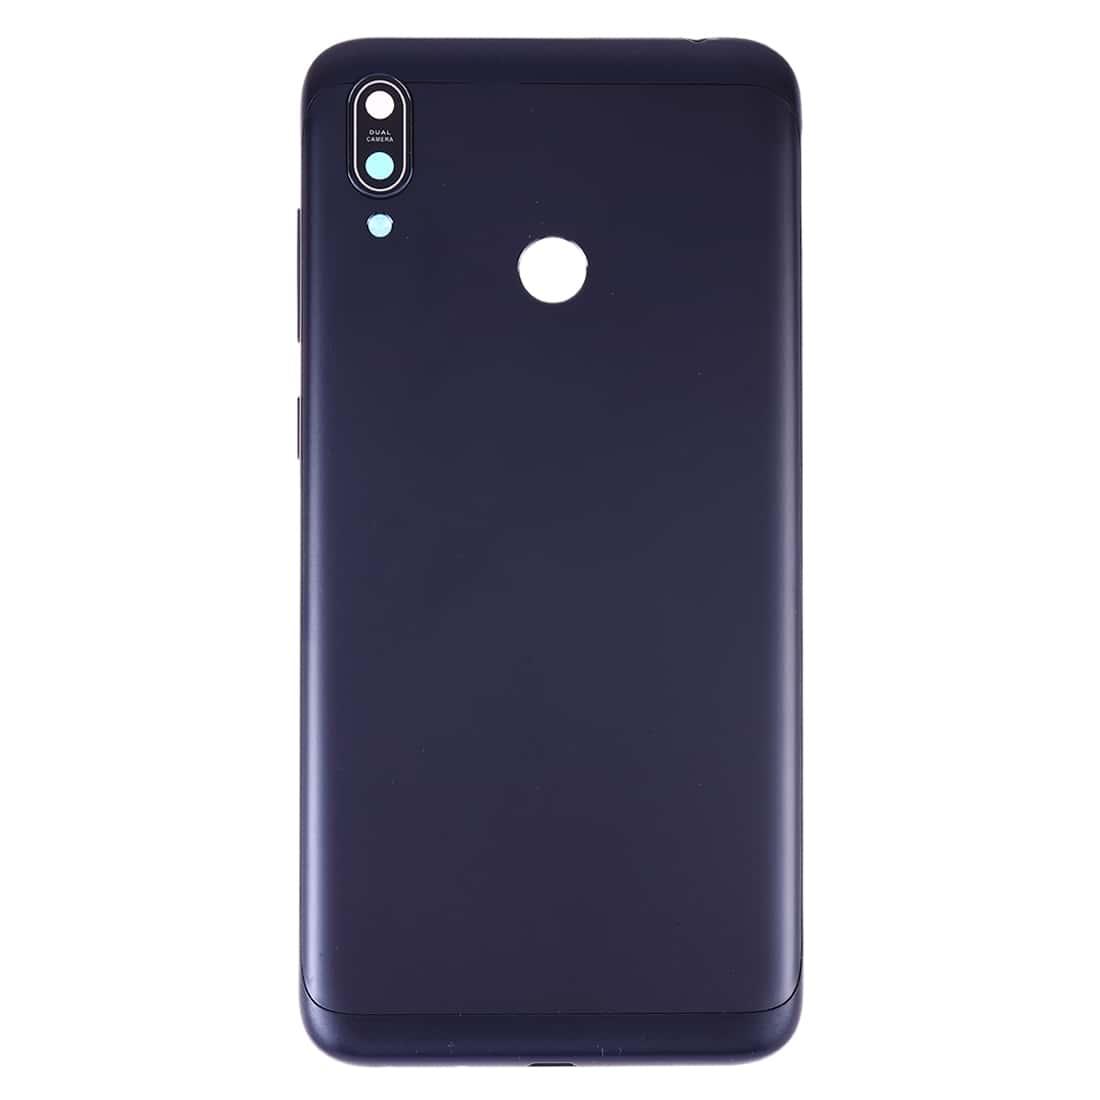 Back Panel Housing Body for Asus Zenfone Max M2 Dark Blue with Camera Lens